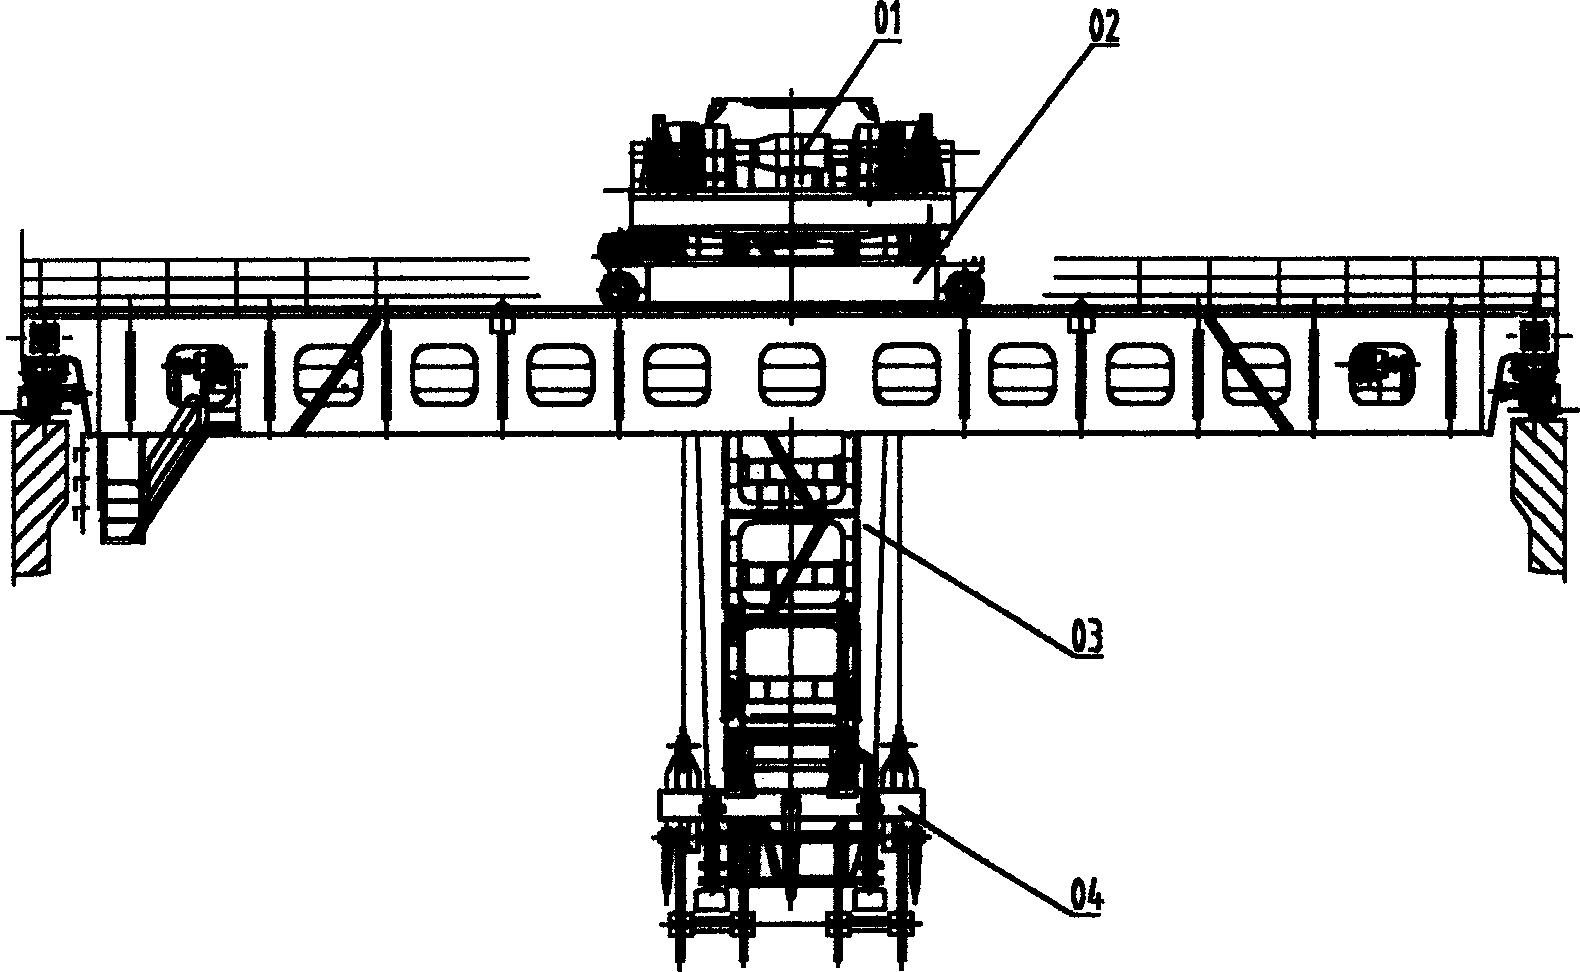 Guide and rotation mechanism for crane hanger